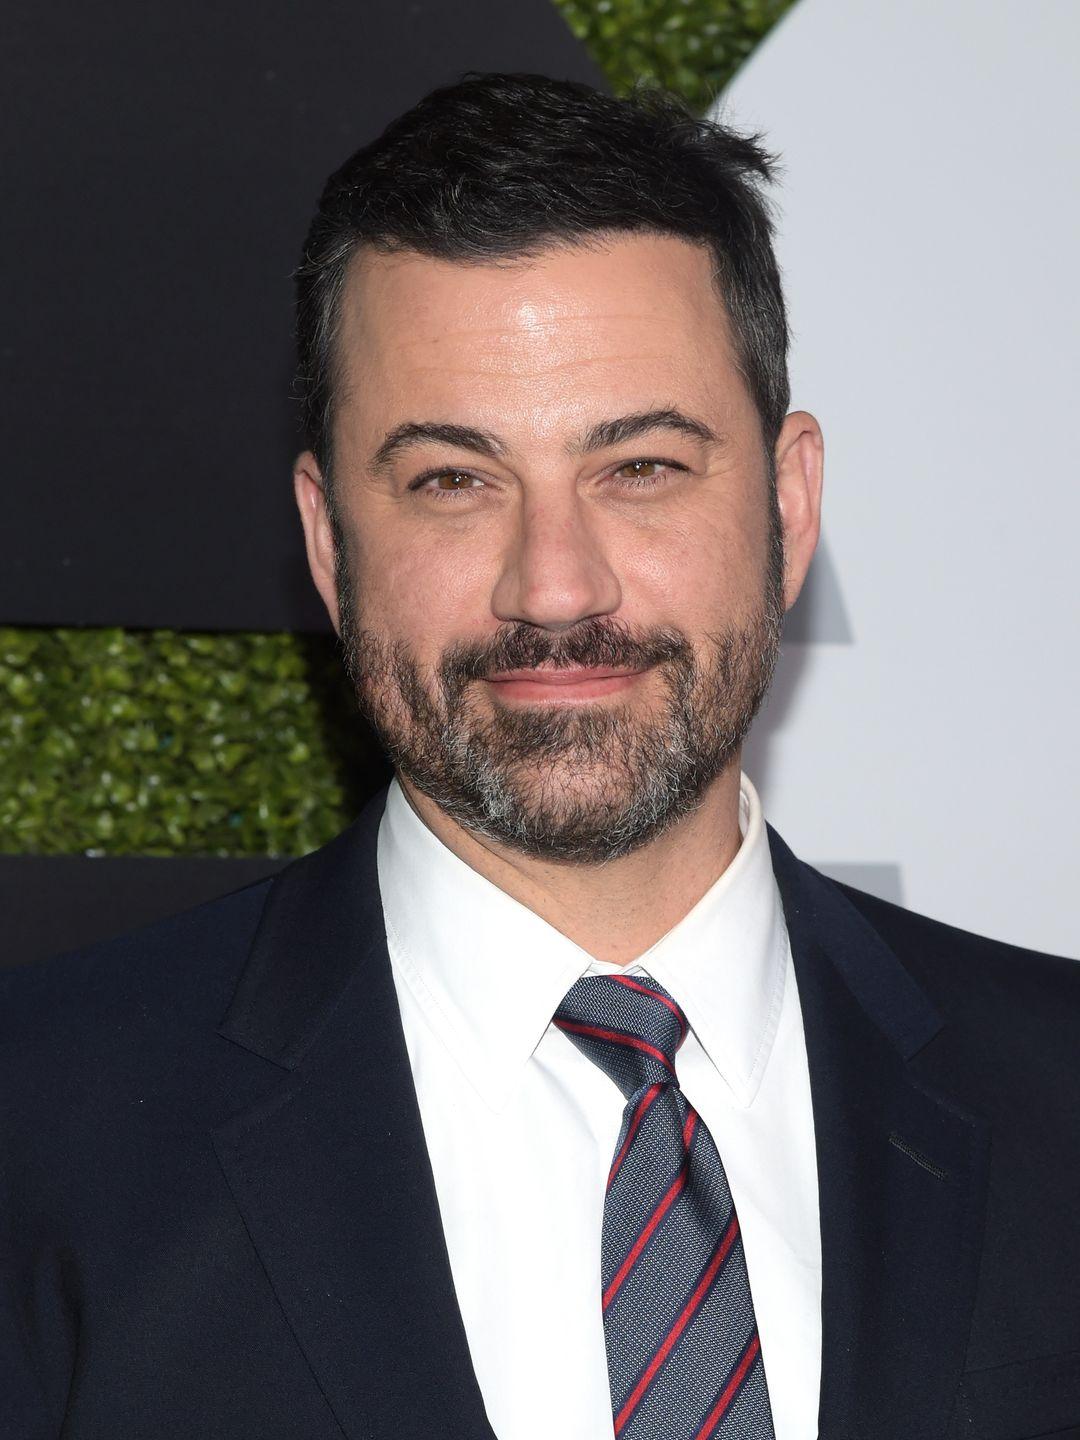 Jimmy Kimmel how did he became famous